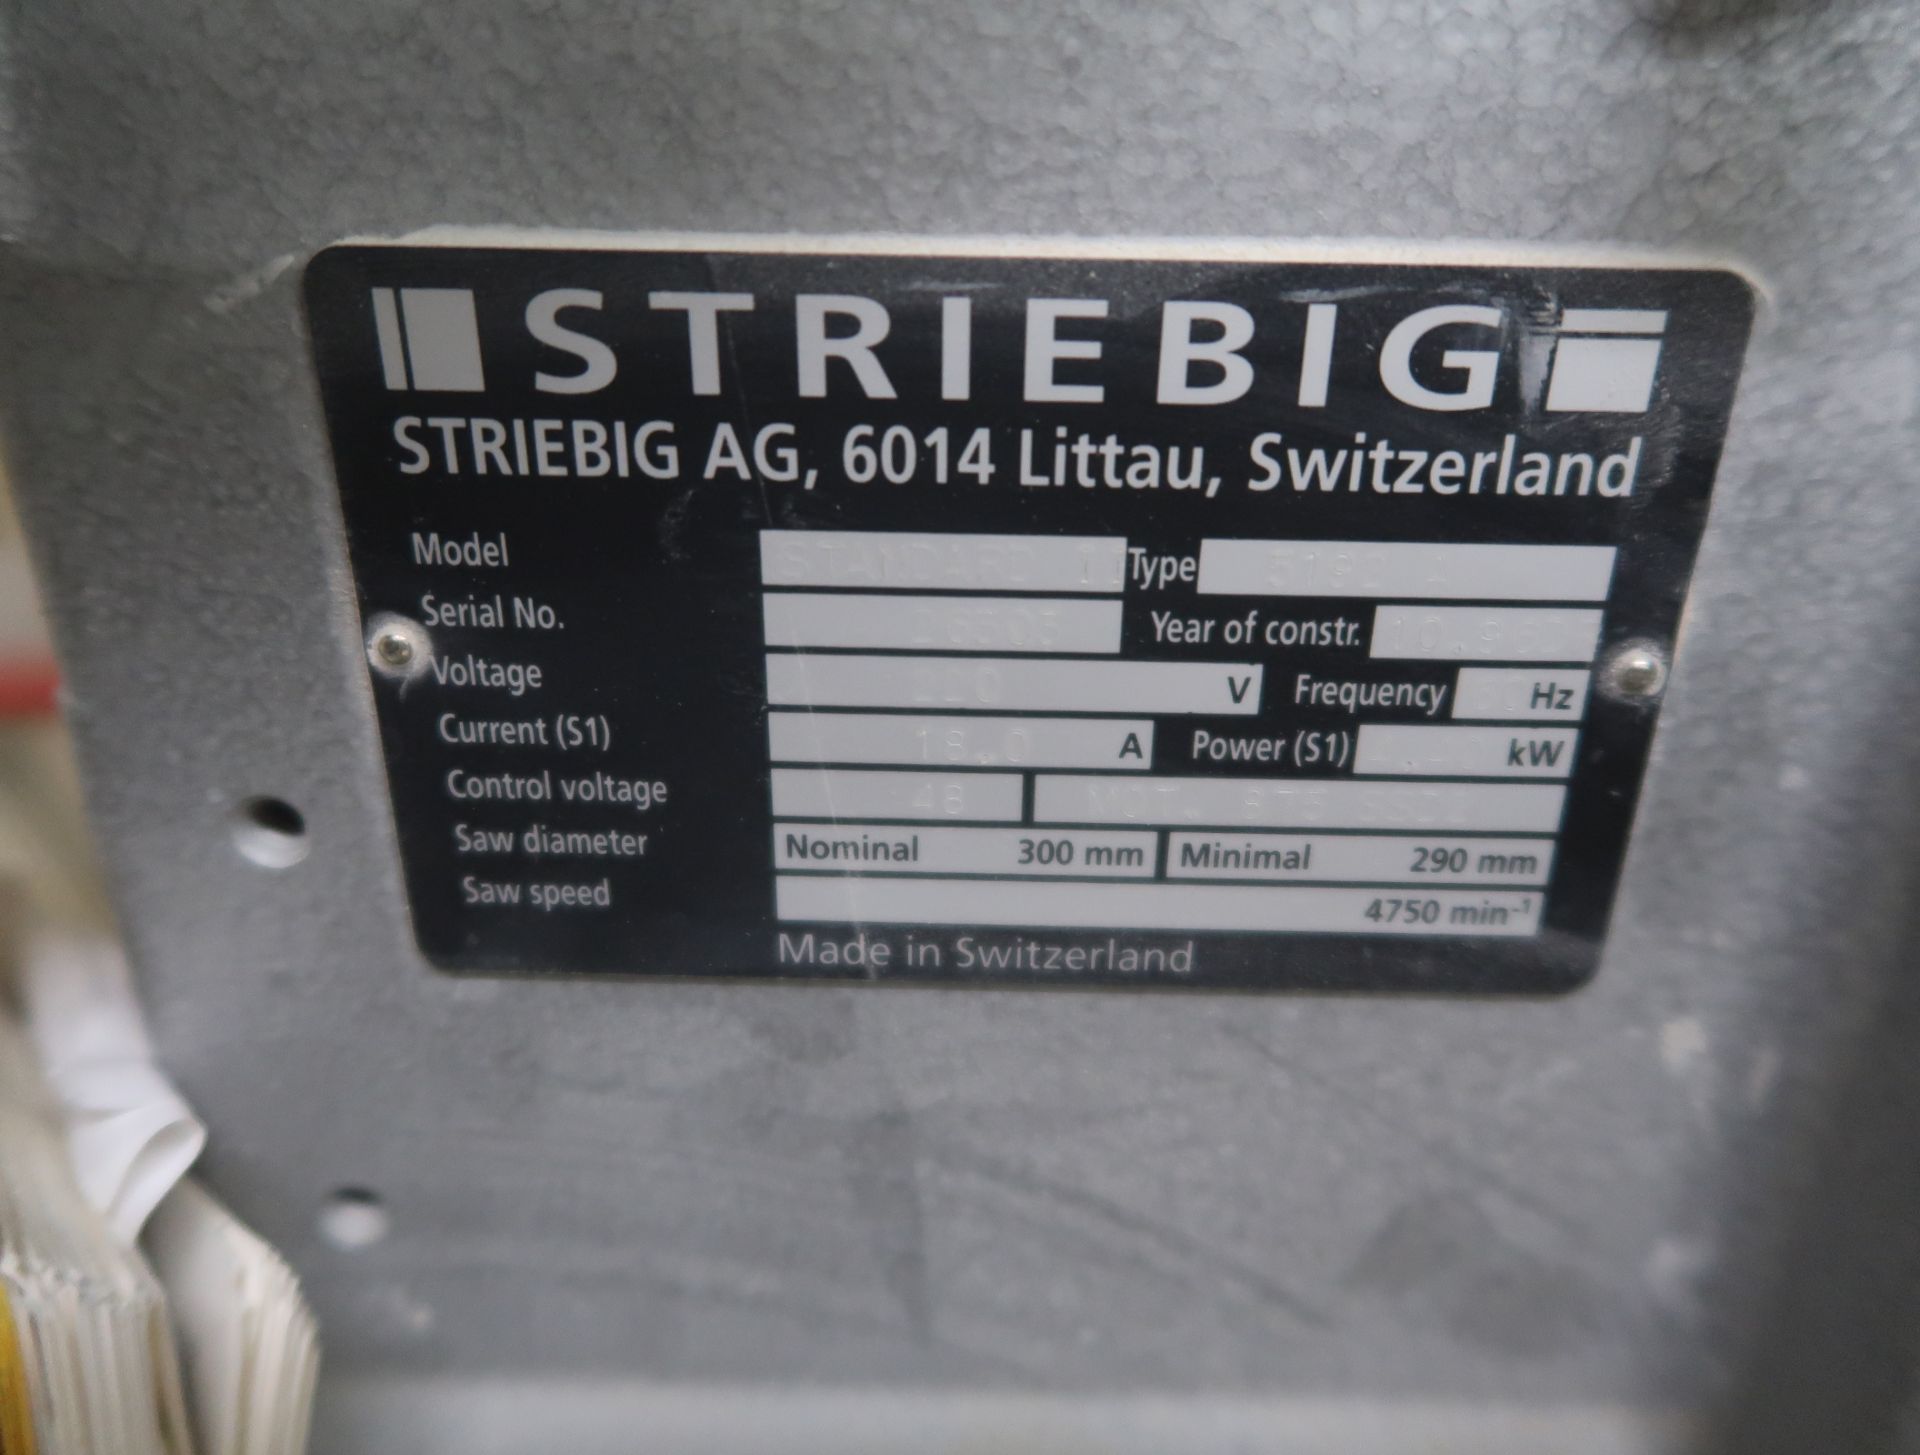 STRIEBIG OPTISAW 2 MDL. STANDARD II, TYPE 5192A VERTICAL PANEL SAW - Image 3 of 4